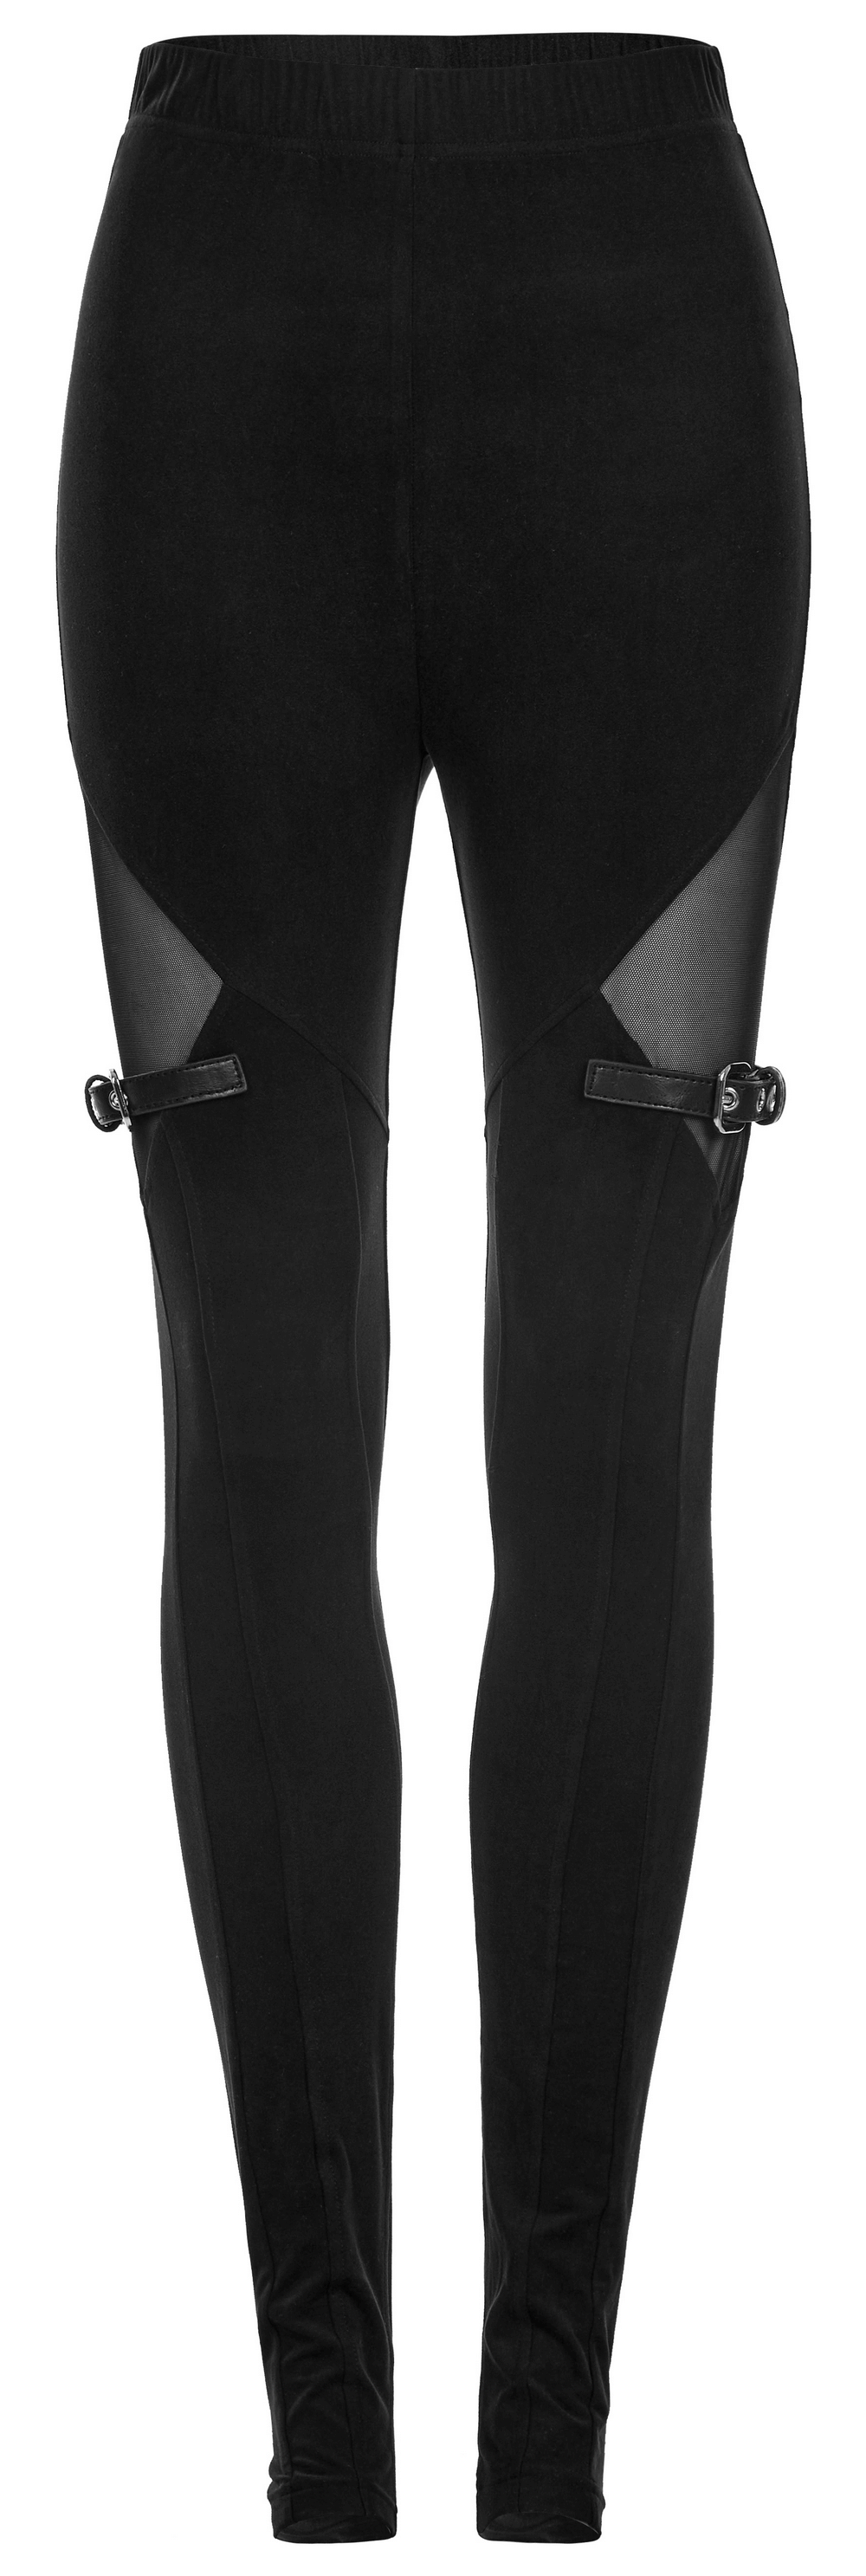 Black Gothic Mesh-Panel Leggings with Buckle Accents